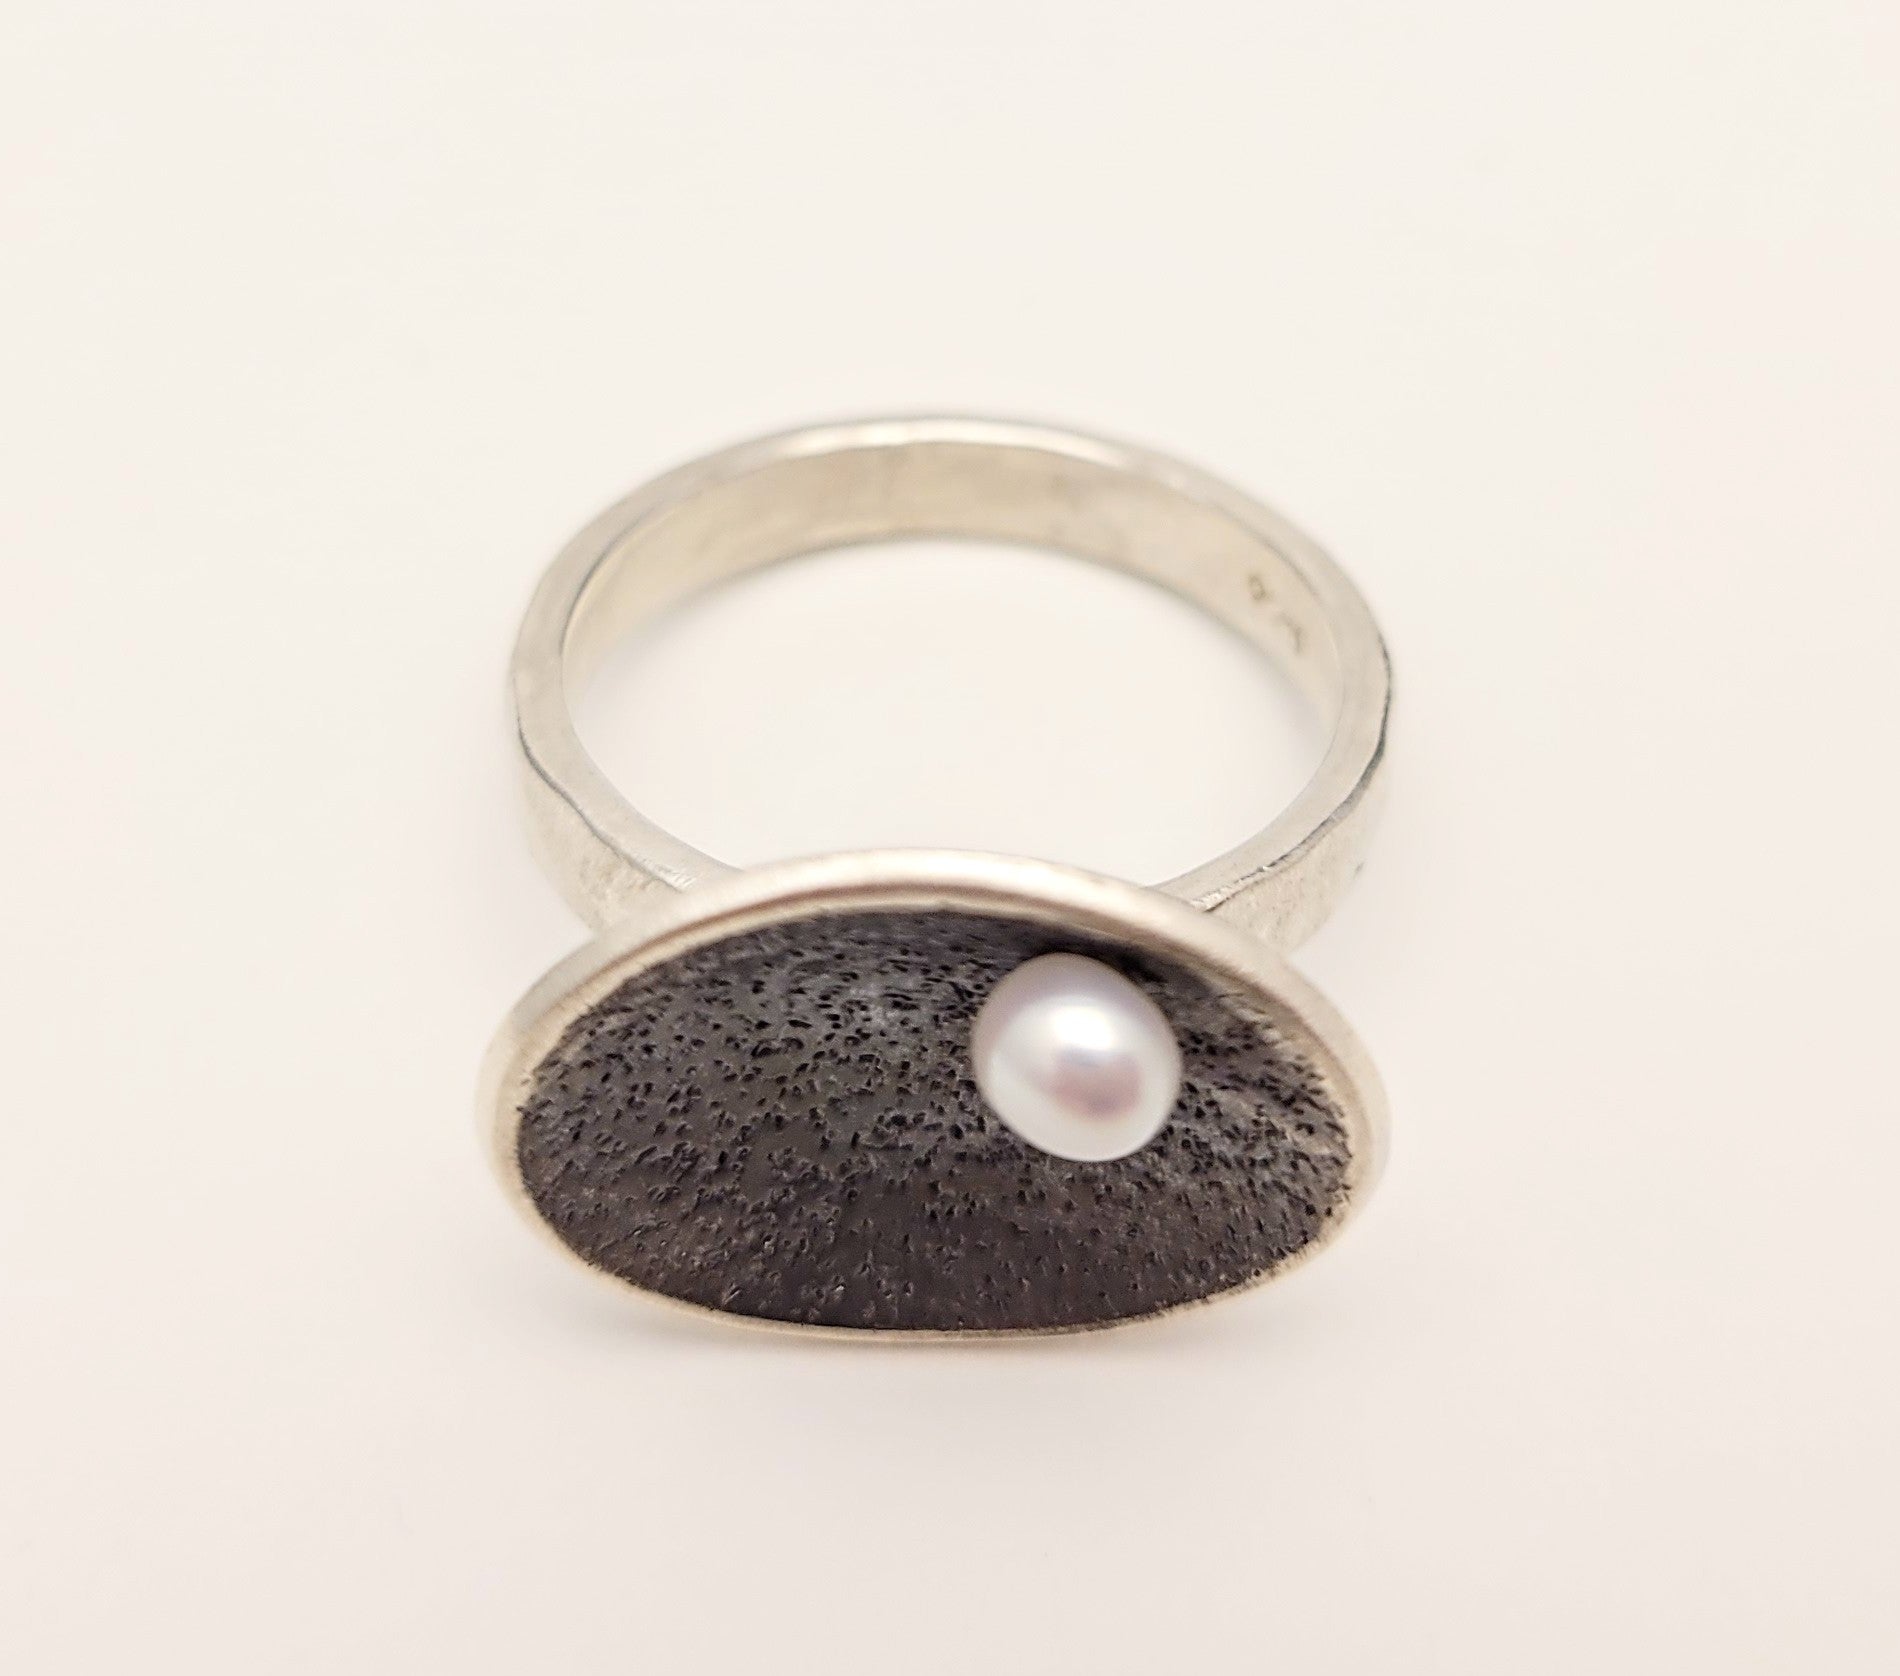 OXIDIZED STERLING RING WITH WHITE PEARL